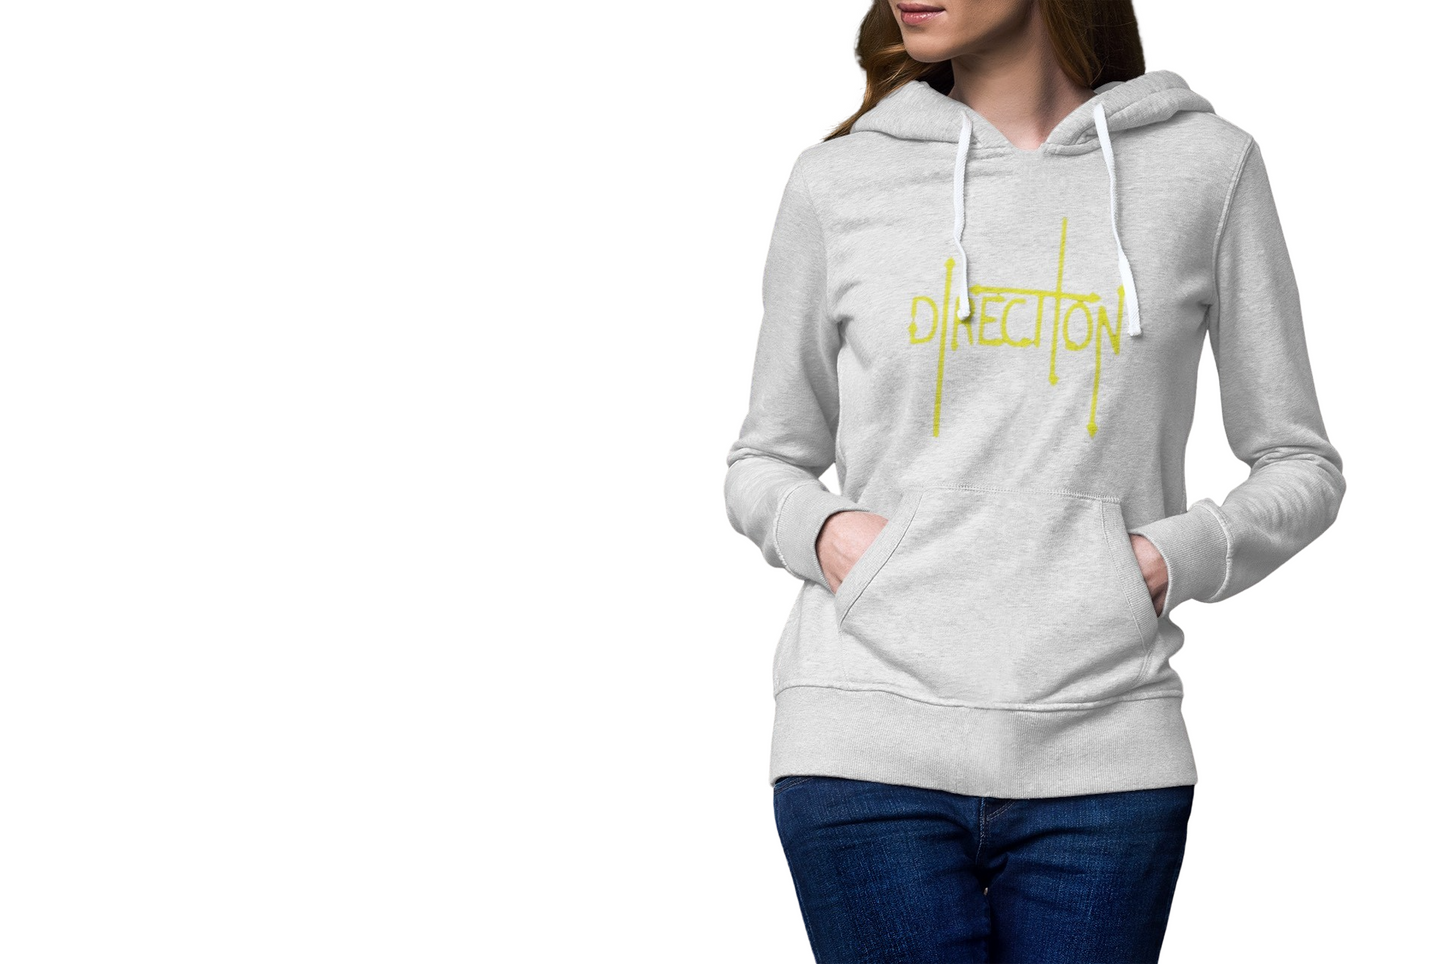 Women's 48% Cotton 52% Polyester DIRECTION Hoodie